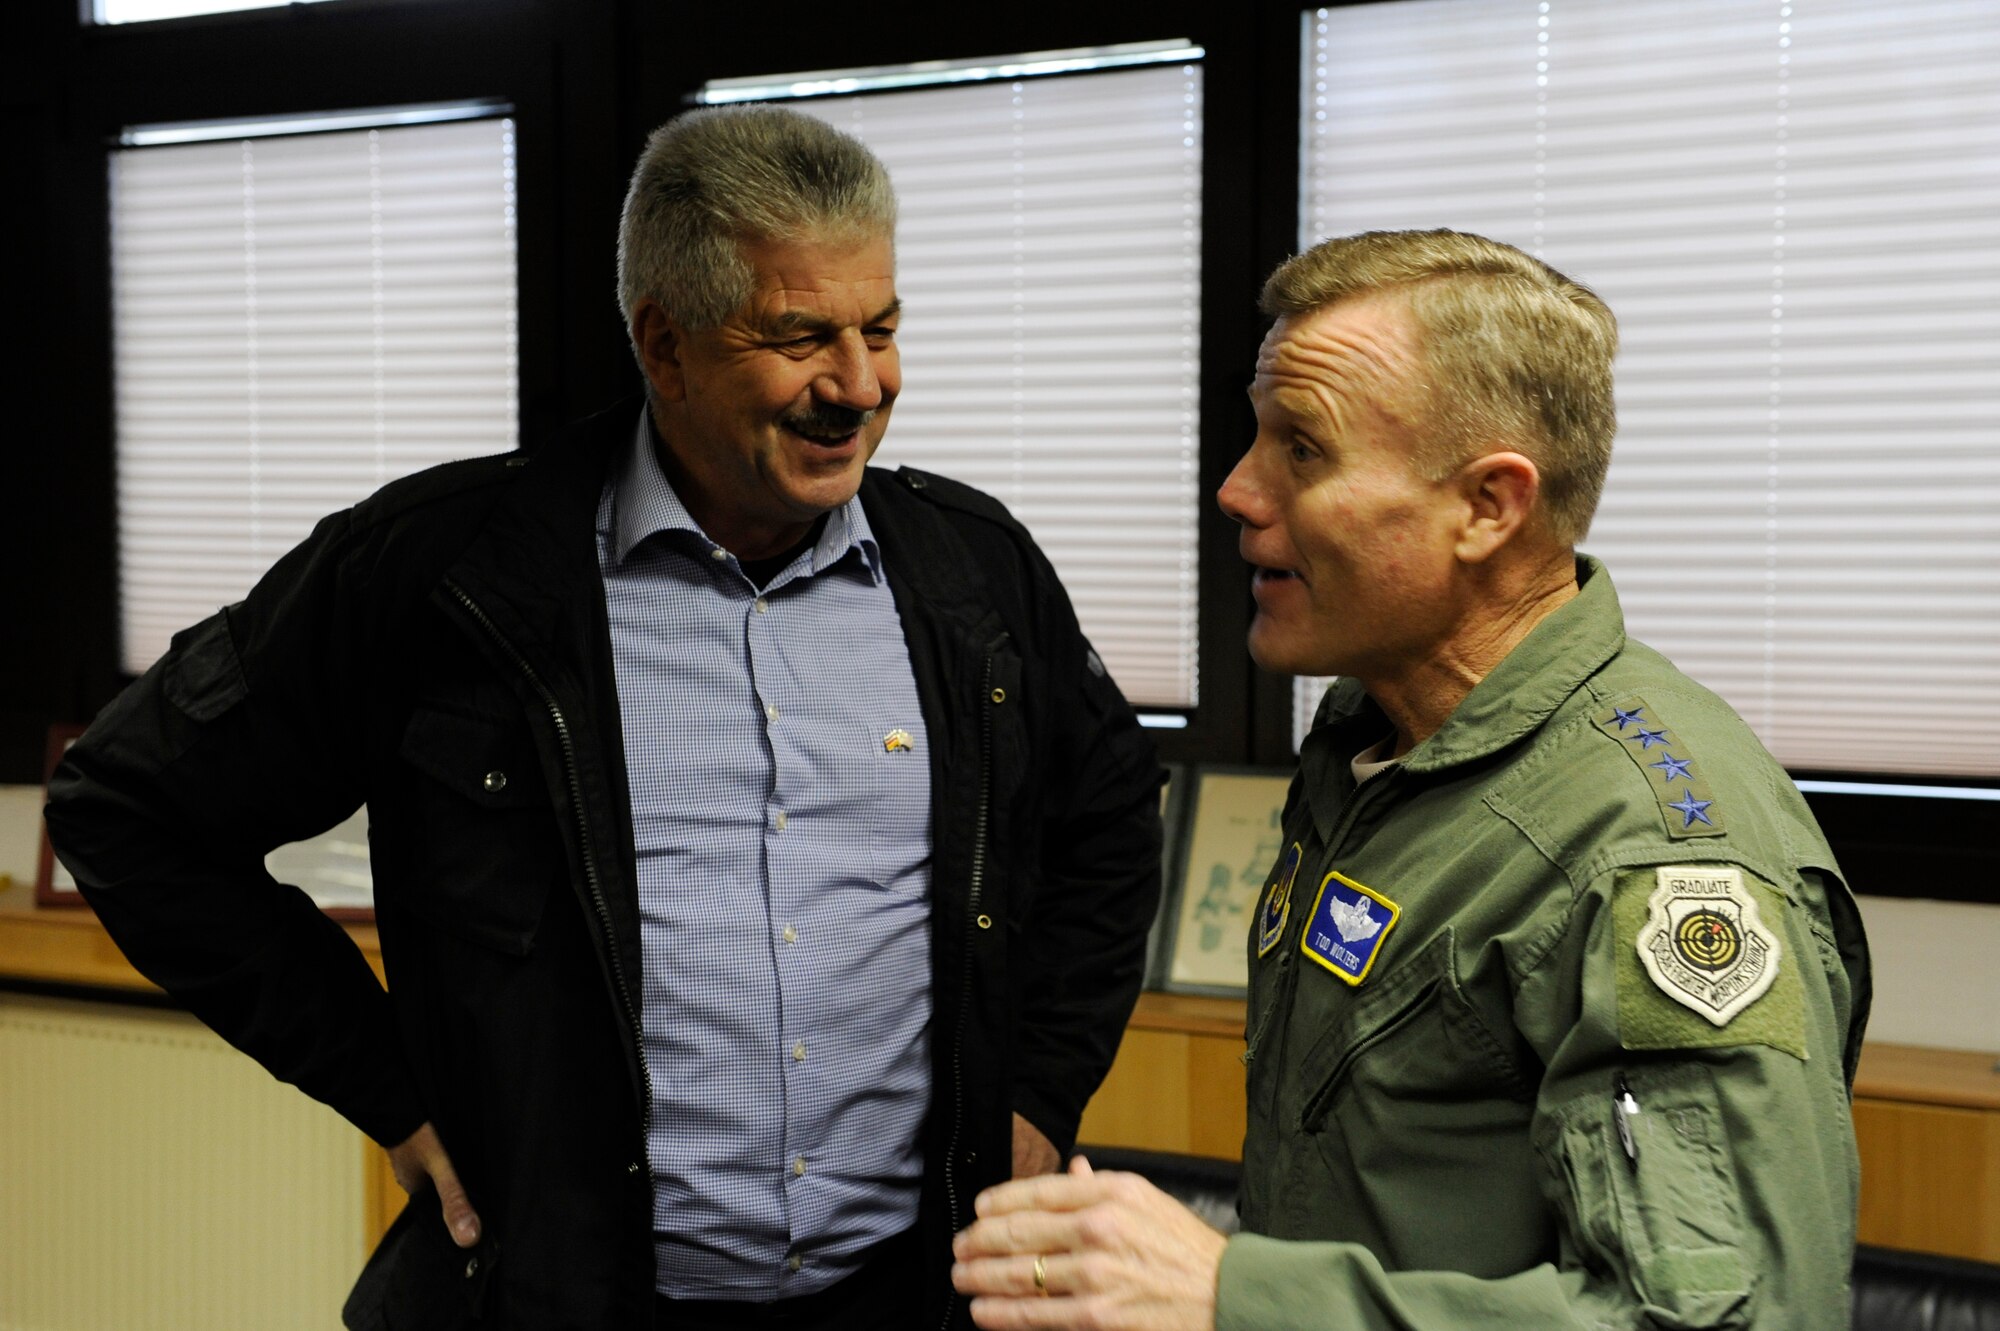 Gen. Tod D. Wolters, U.S. Air Forces in Europe and Air Forces Africa commander, right, visits with Klaus Rodens, Mayor of Spangdahlem, Germany, left, while touring Spangdahlem Air Base, Germany, Oct. 6, 2016. Wolters made his first visit to Spangdahlem since assuming command in August 2016. He spoke to Airmen on the importance their missions and highlighted his command priorities. (U.S. Air Force photo by Senior Airman Joshua R. M. Dewberry)